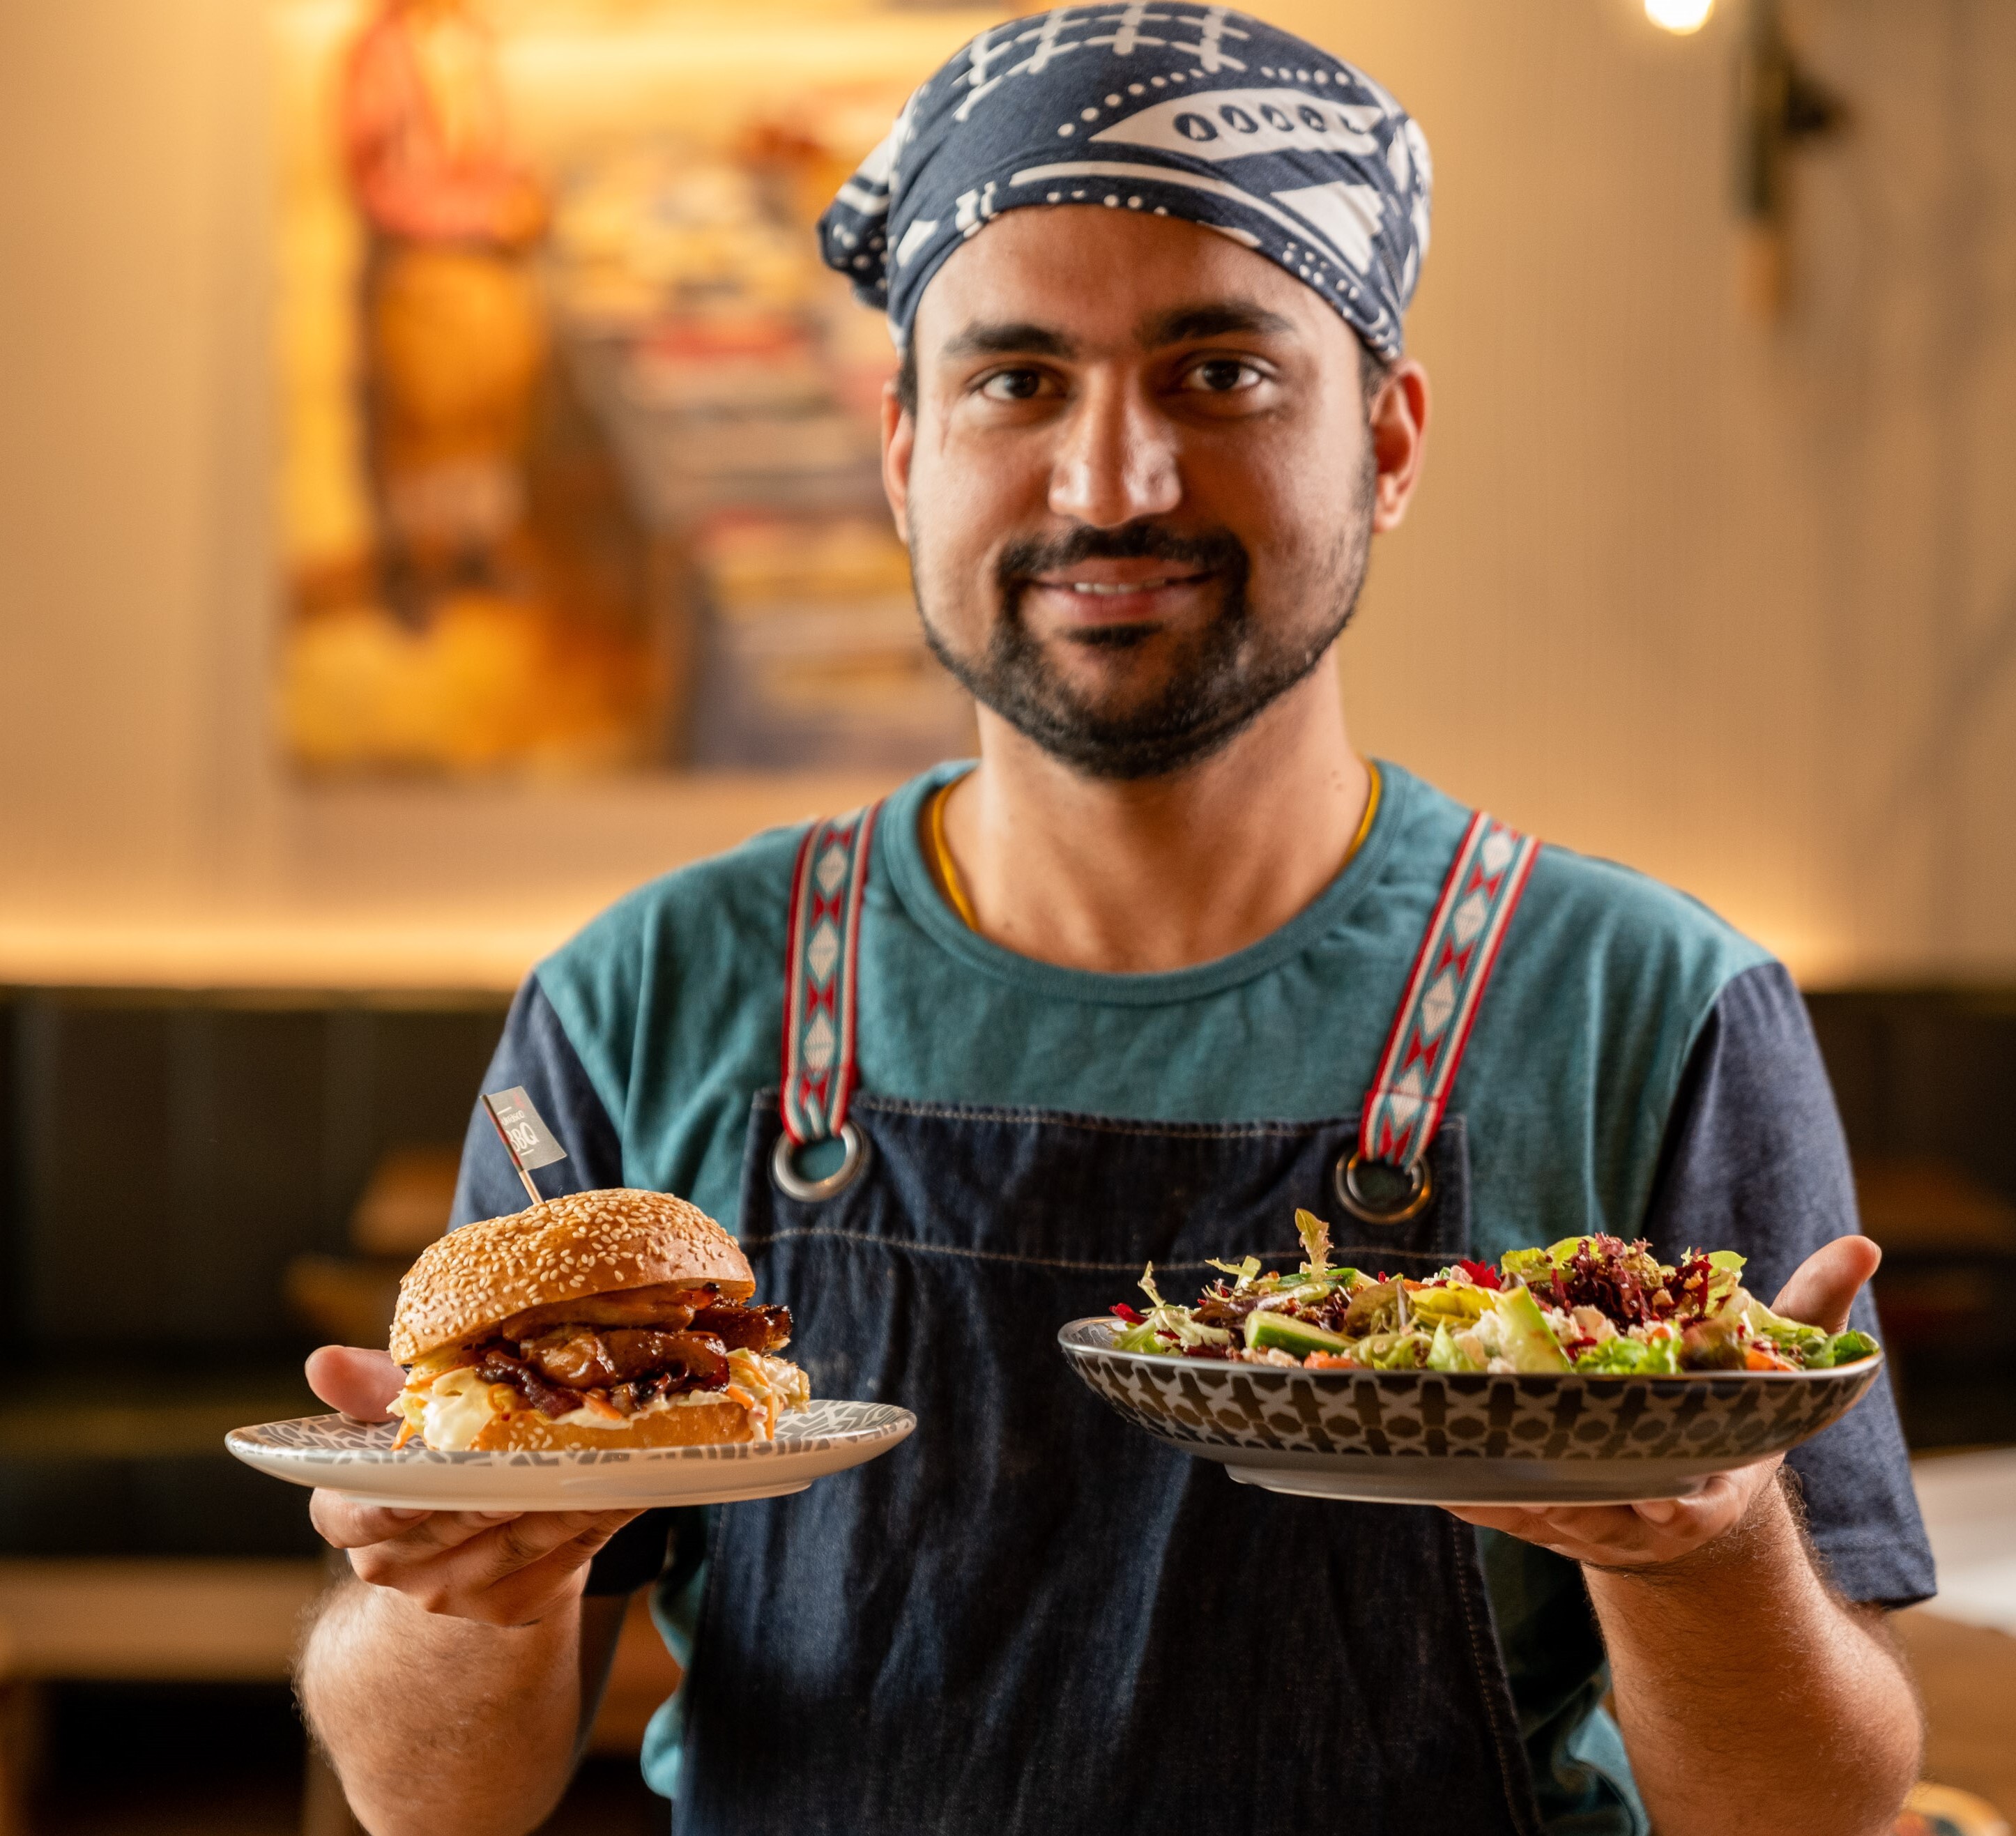 A Nando's staff member carrying a burger and a salad